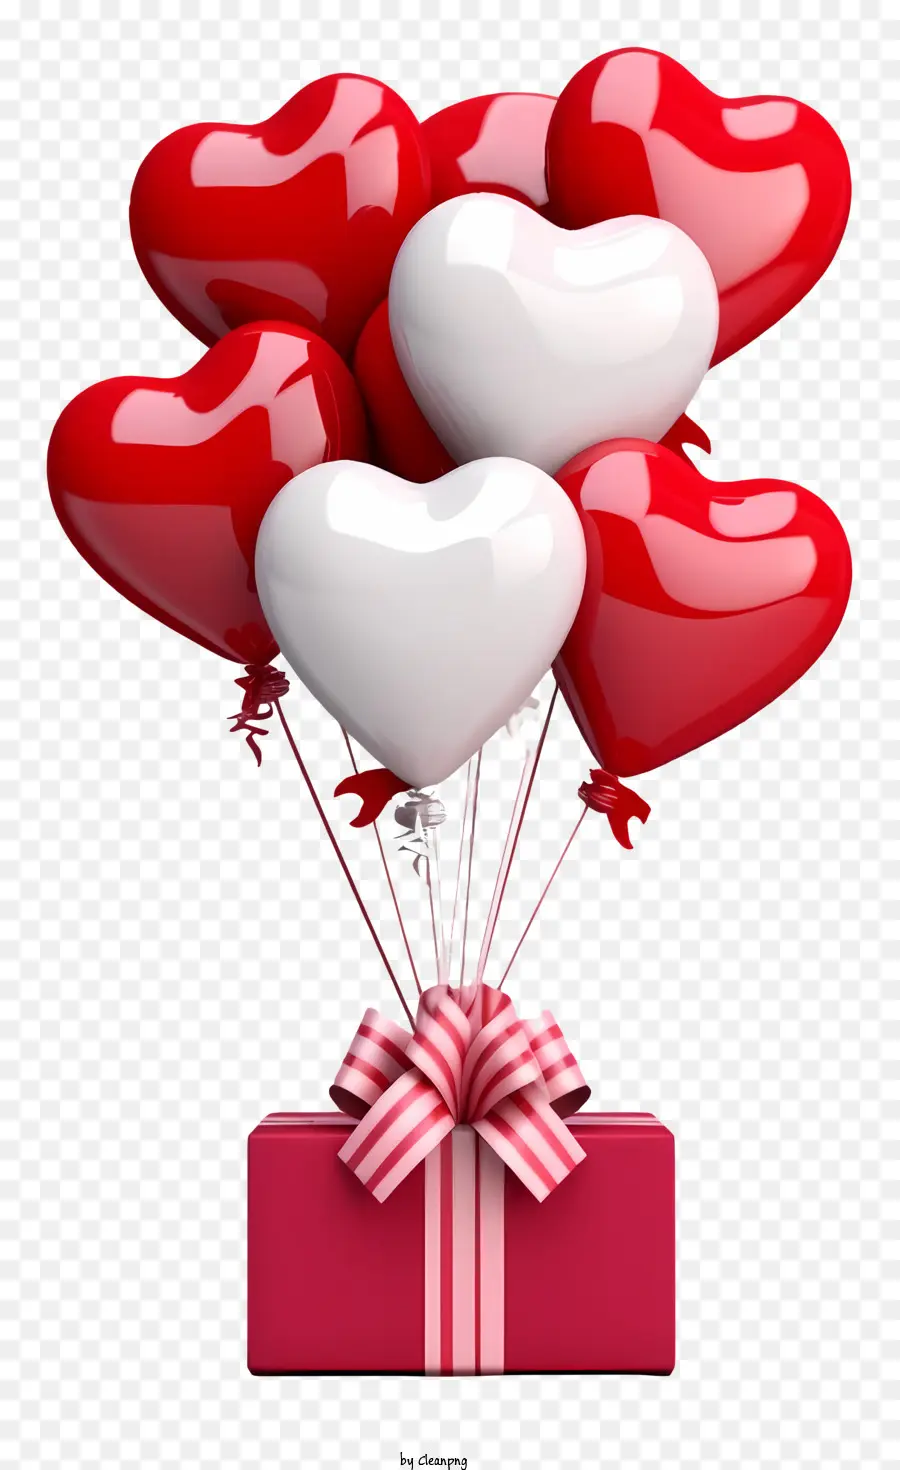 realistic 3d valentine gift balloon balloon arrangement heart-shaped box pink box with bow red and white balloons